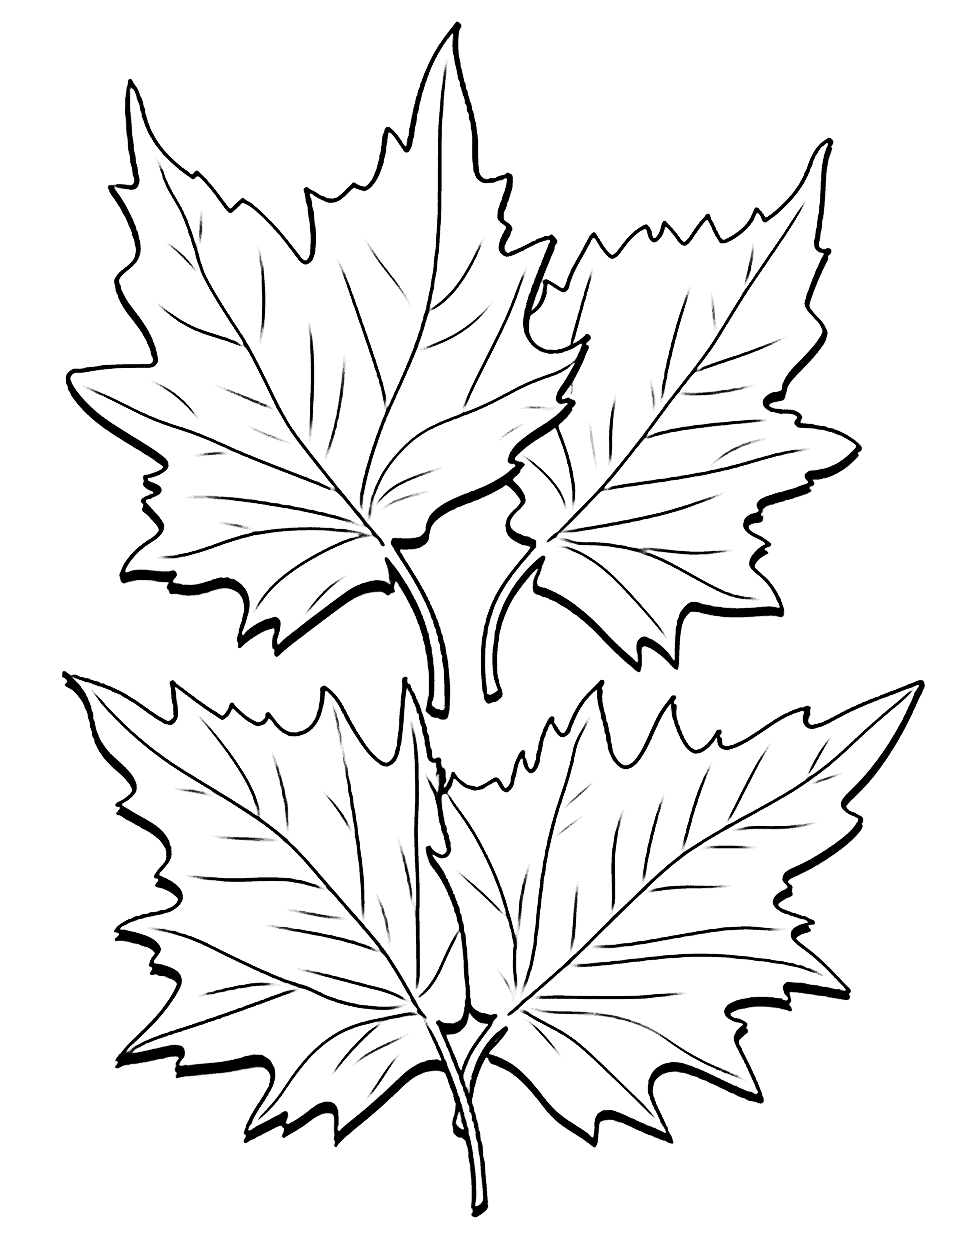 Fun with Fall Leaves Thanksgiving Coloring Page - A picture full of fall leaves for children to color.